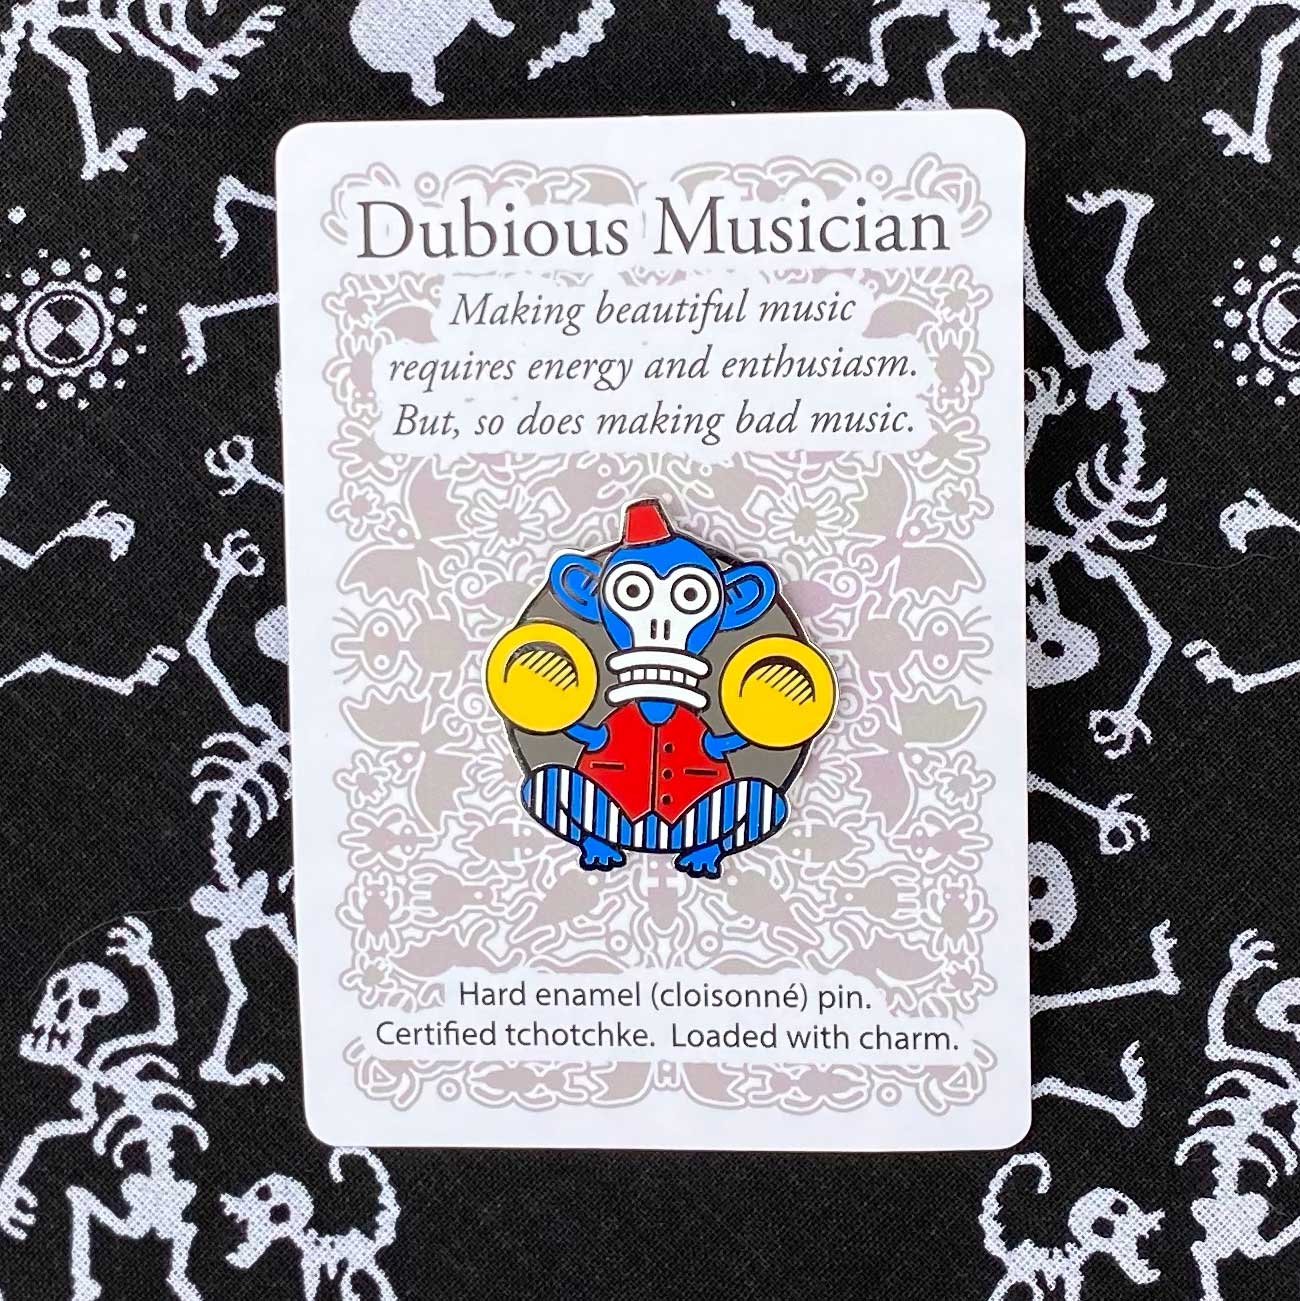 Dubious Musician Pin Gift with $75 Purchase